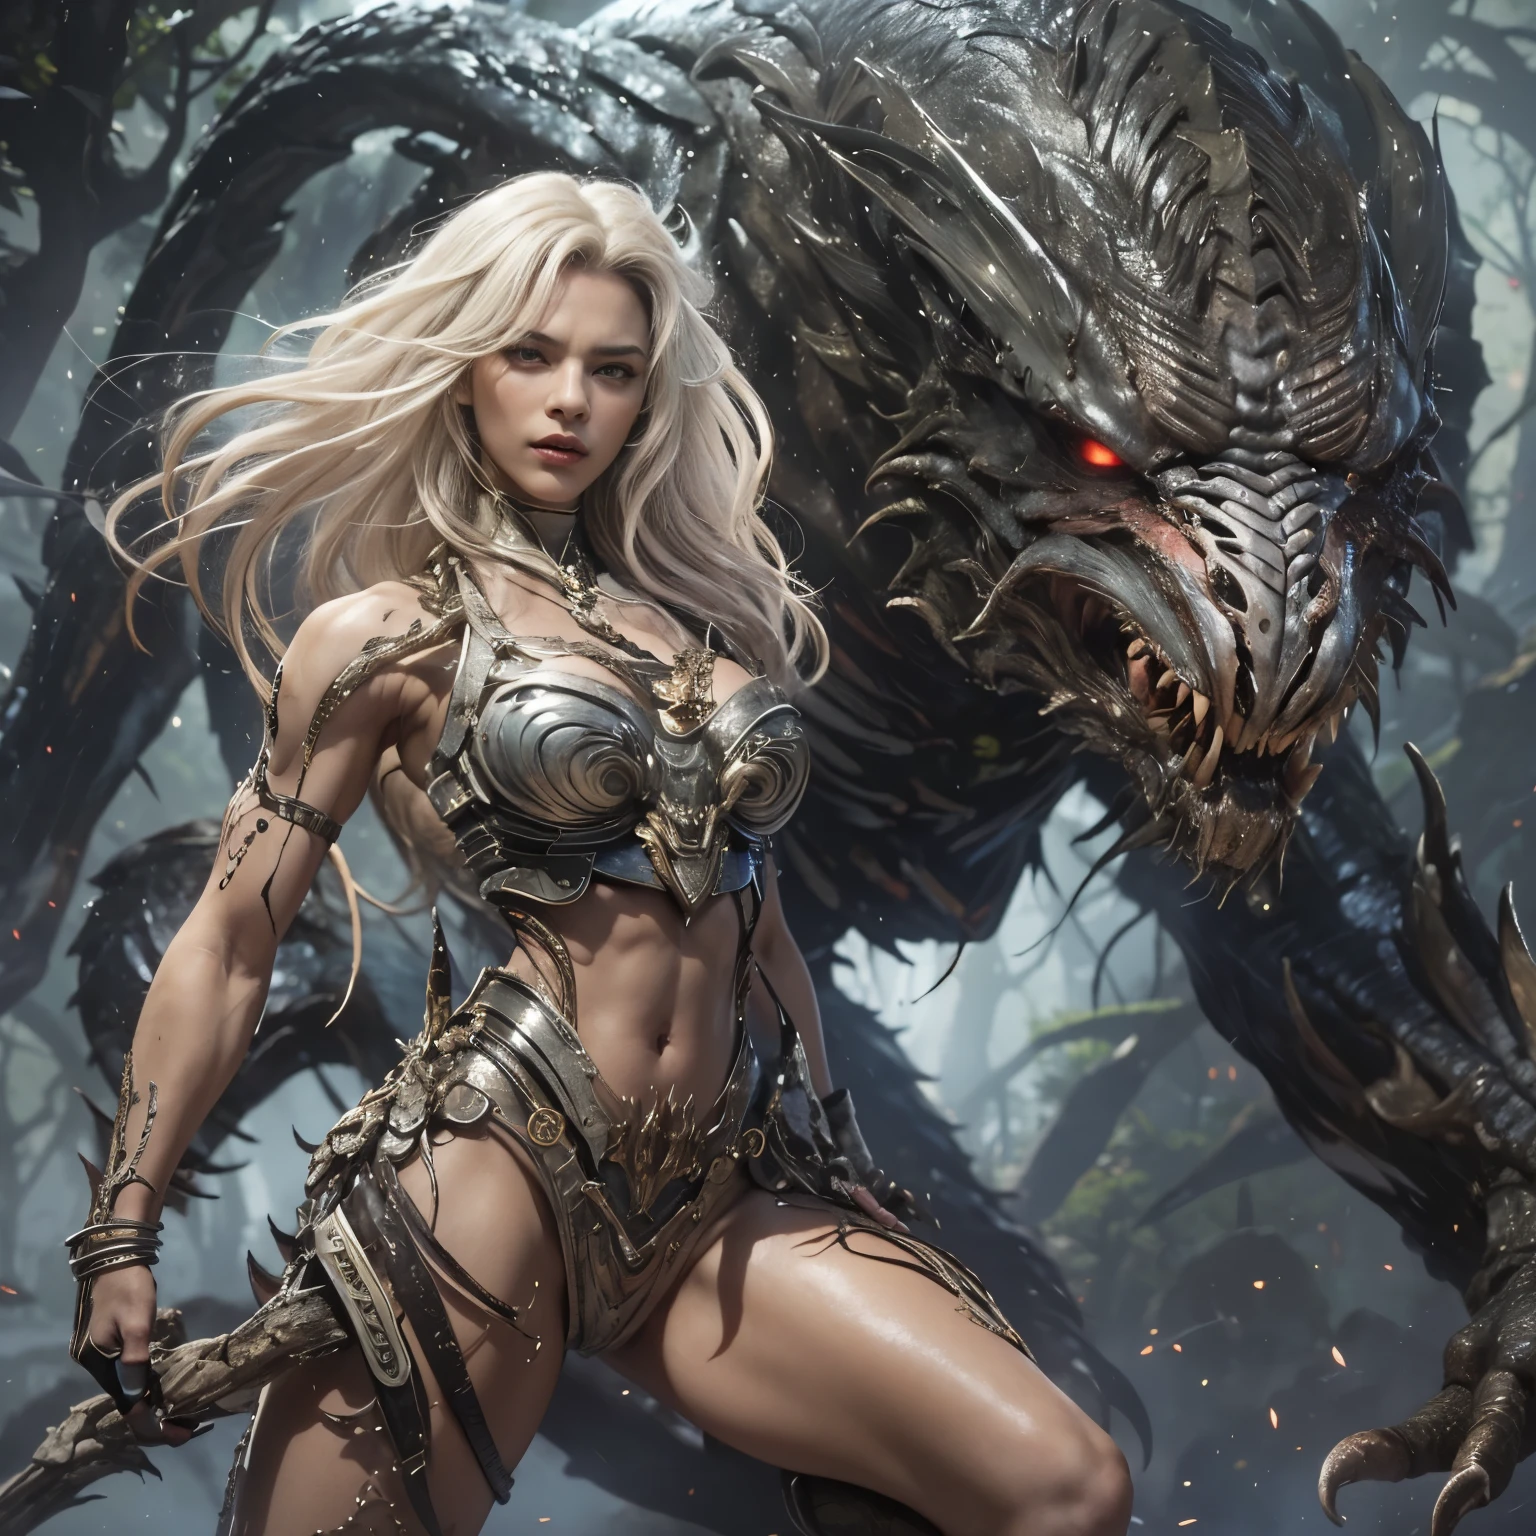 1 female alien, The predator, warrior, (extremely beautiful:1.2), (intense gaze:1.6), (predator:1.6), long dark claws, NSFW,  nipples, thick eyebrows, glowing and shining れｄ eyes, the most beautiful face in the universe, silver blonde hair,
A woman with an extremely beautiful face, her intense gaze fixed on her prey, a primal force that could not be denied.

(extreamly beautiful lean body:1.5), (ultra muscular build:1.2), (prowling:1.3), (sleek movements:1.4),

Her beautiful body, muscular and toned, moved with sleek grace as she prowled, ready to strike at a moment's notice. The predator within her was always on